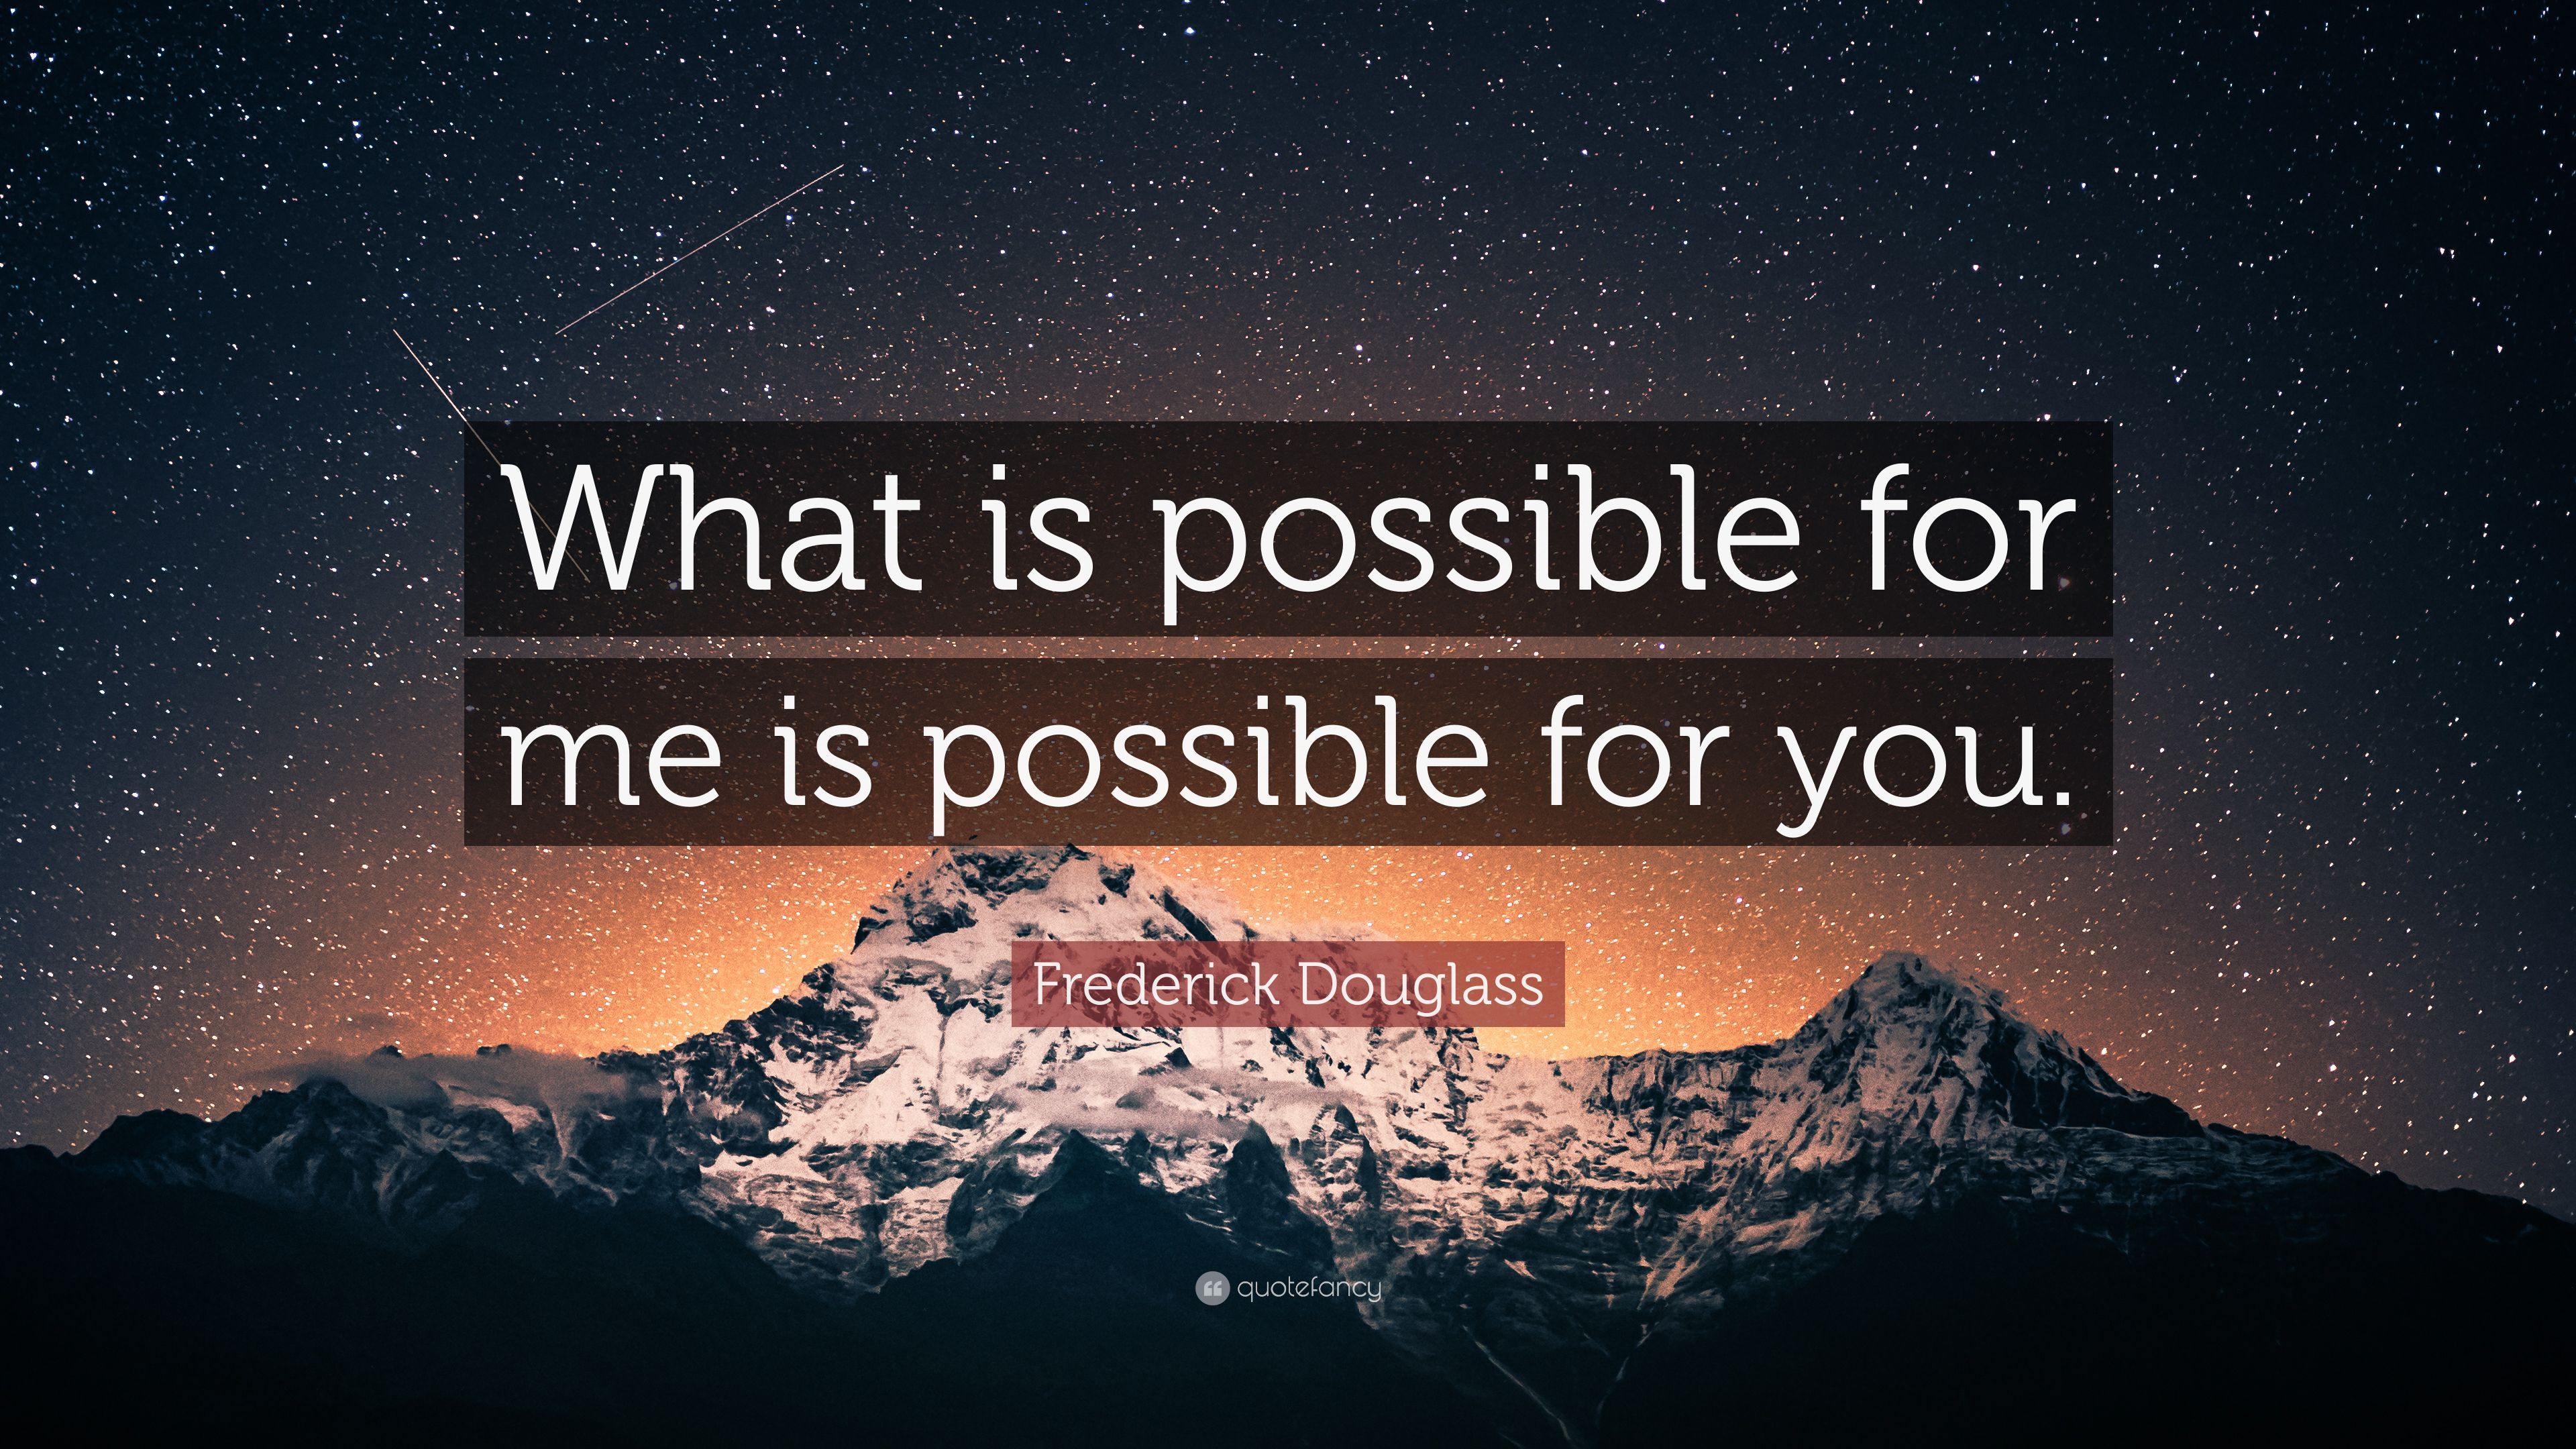 Frederick Douglass Quote: “What is possible for me is possible